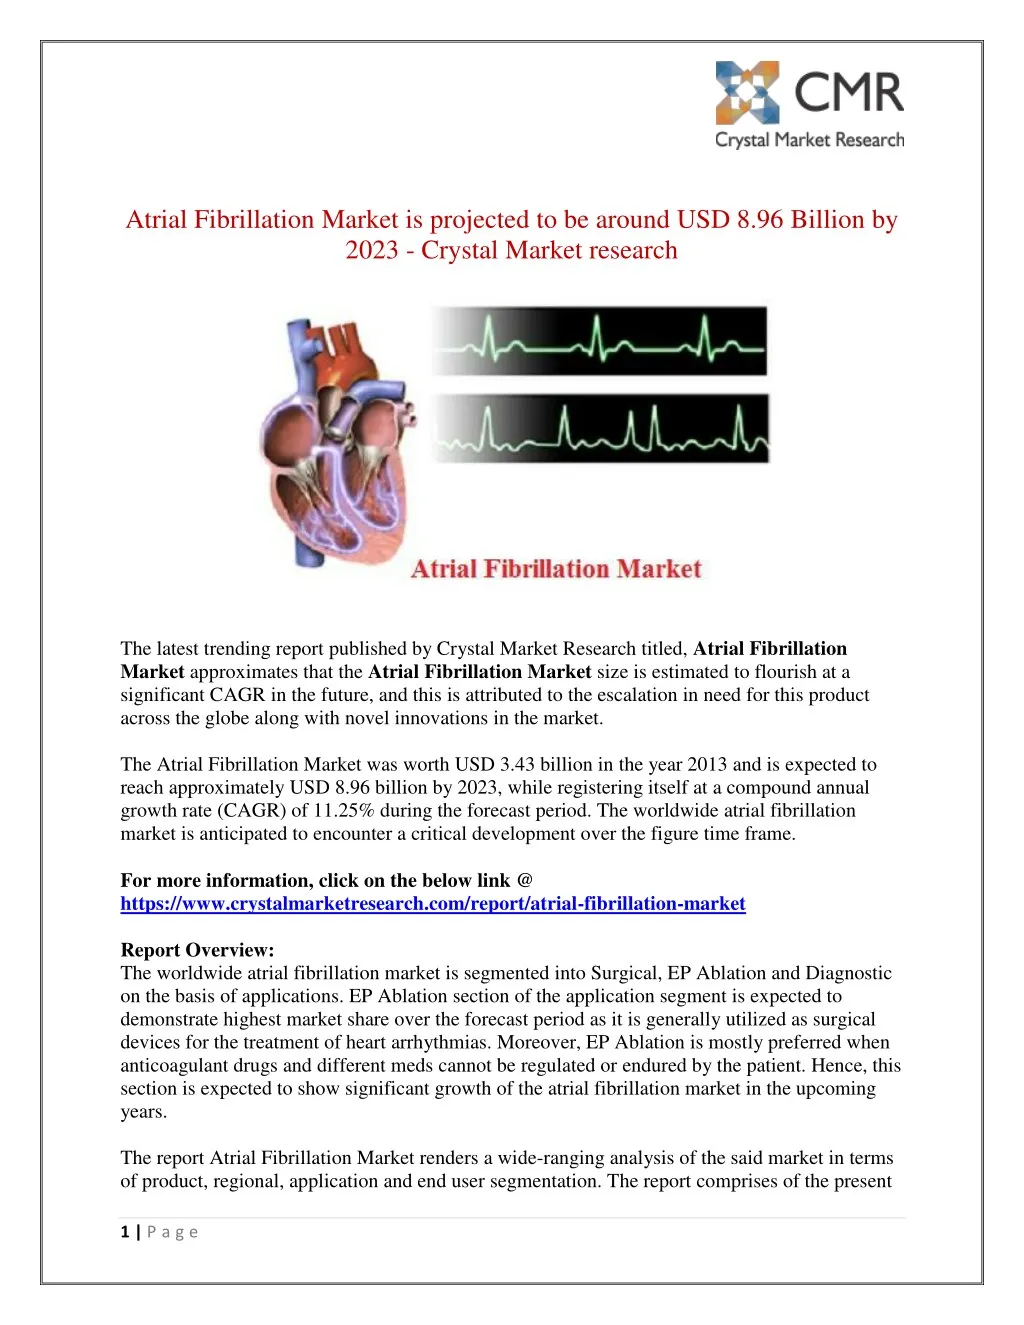 atrial fibrillation market is projected